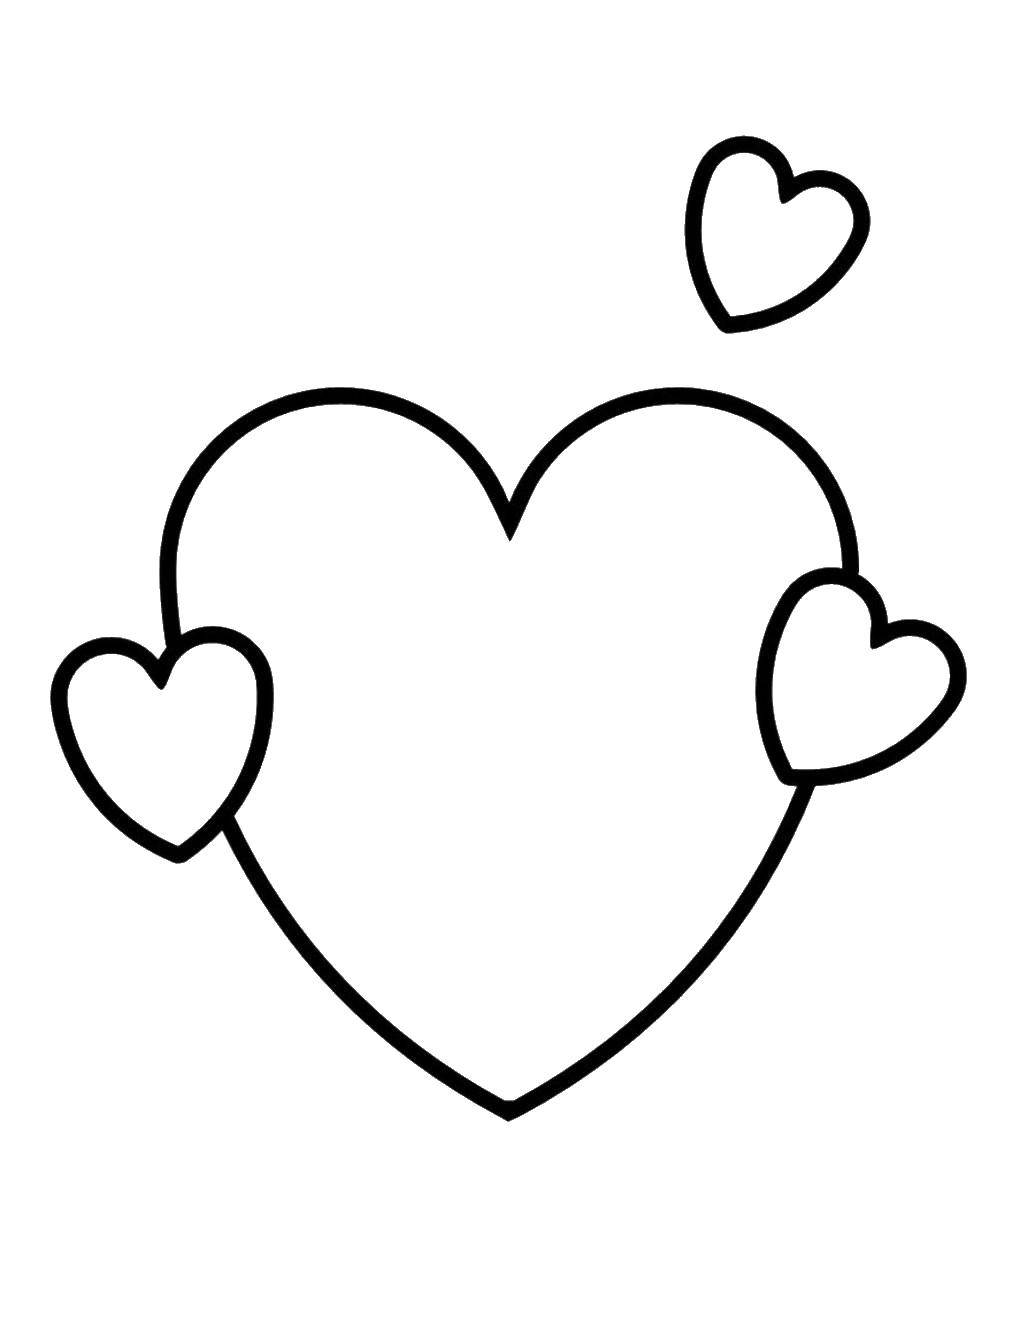 Coloring Hearts. Category I love you. Tags:  Heart, love.